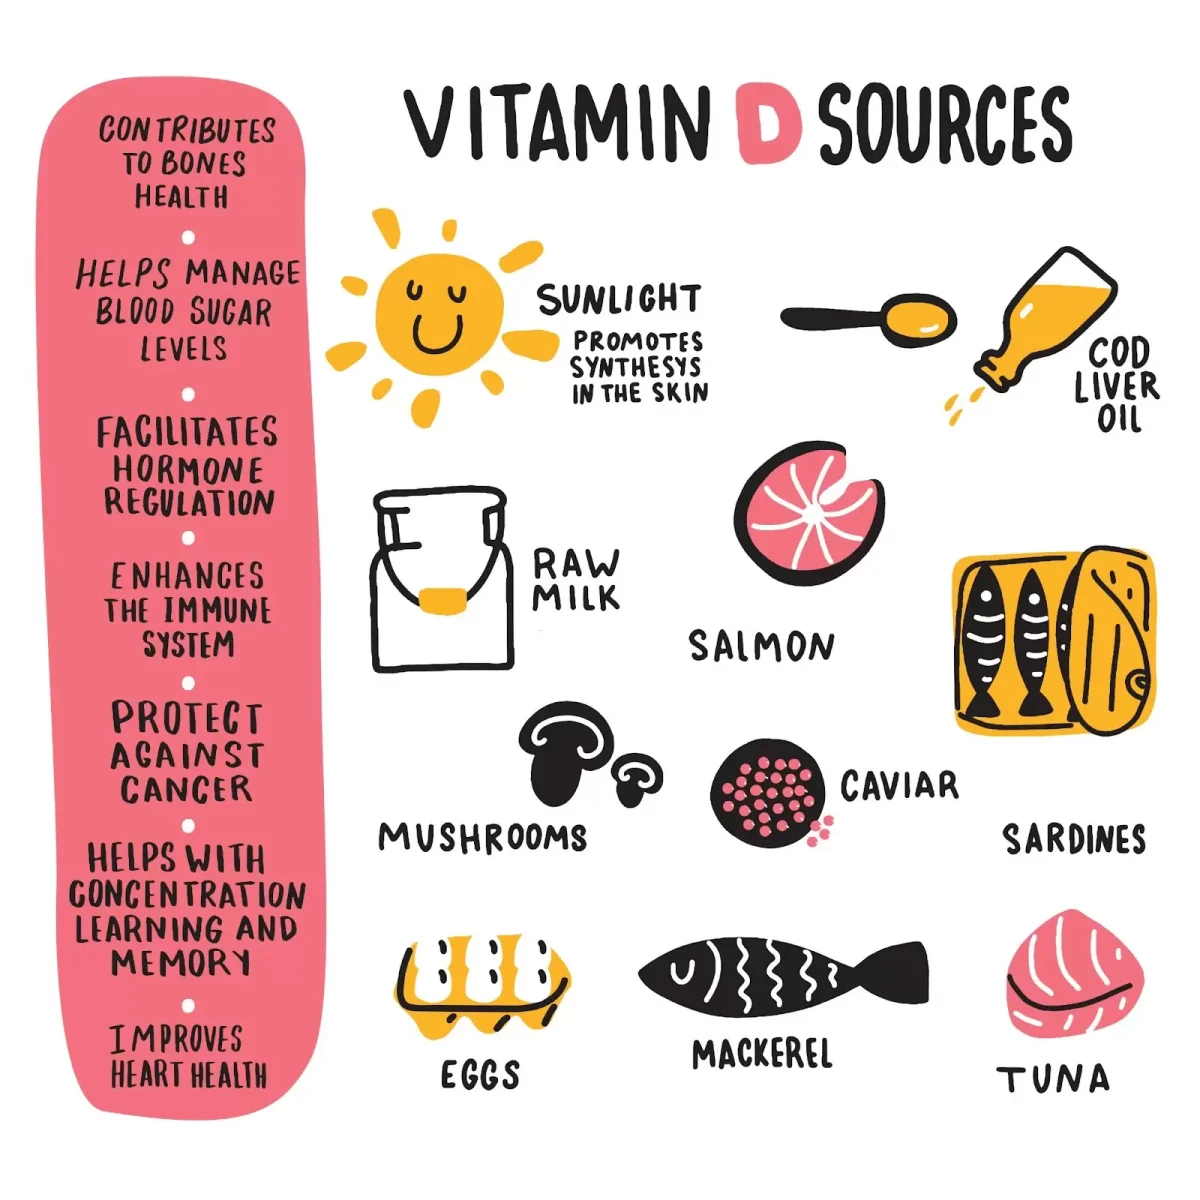 Vitamin D:  How Much Do You Really Need?